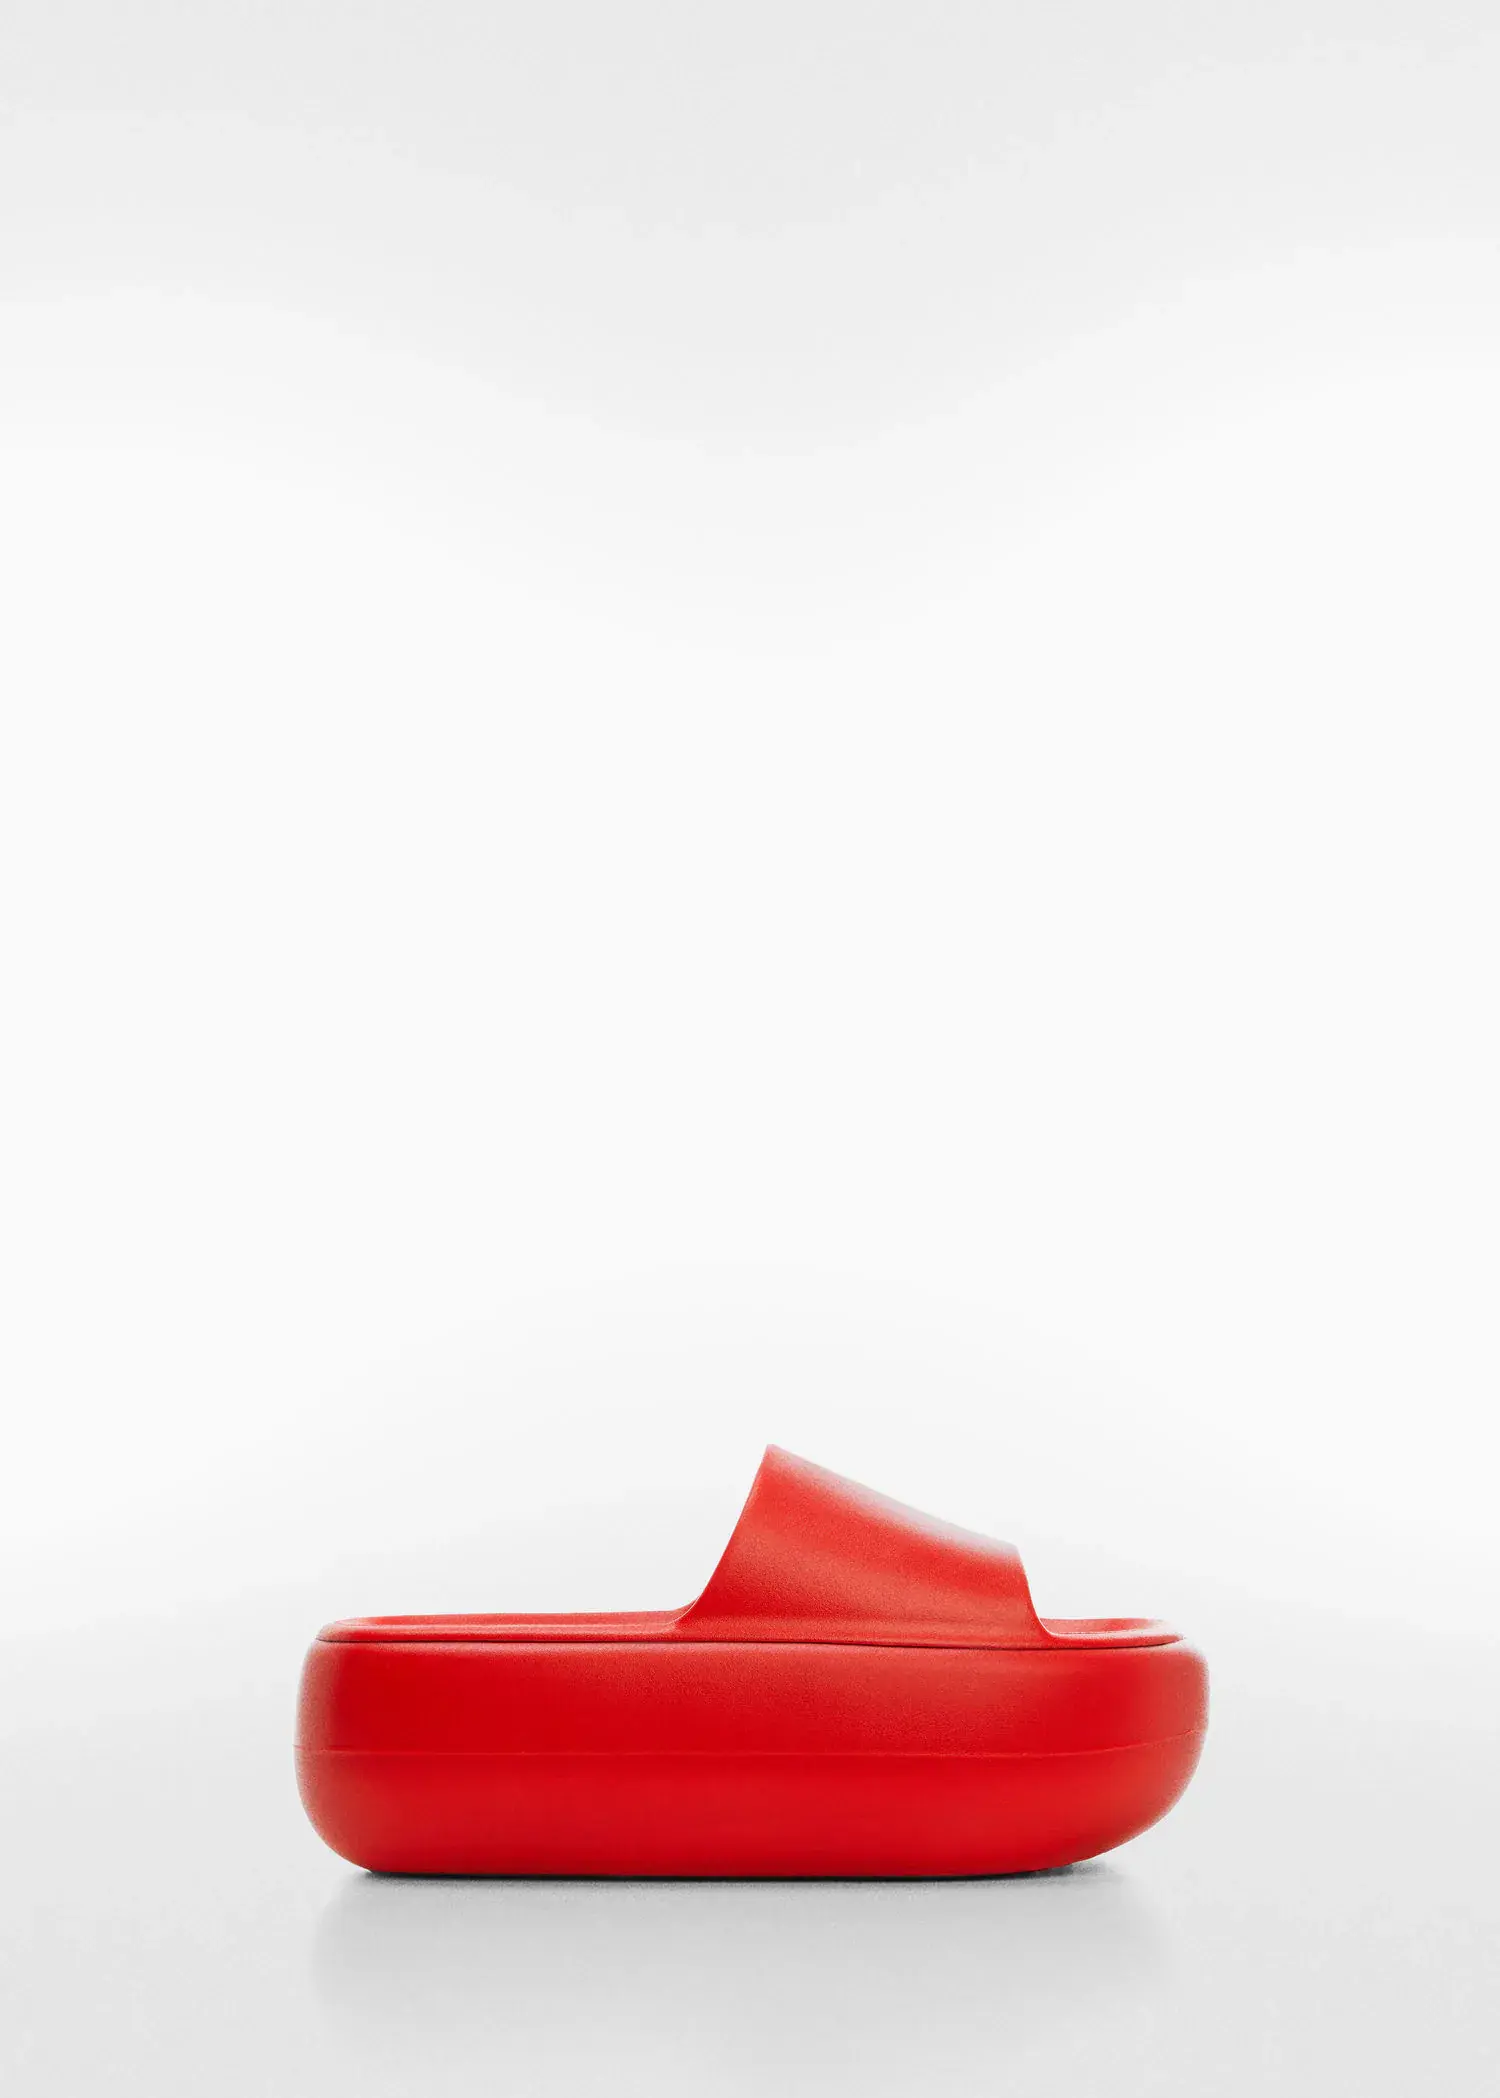 Mango Maxi platform sandals. a pair of red sandals sitting on top of a white surface. 